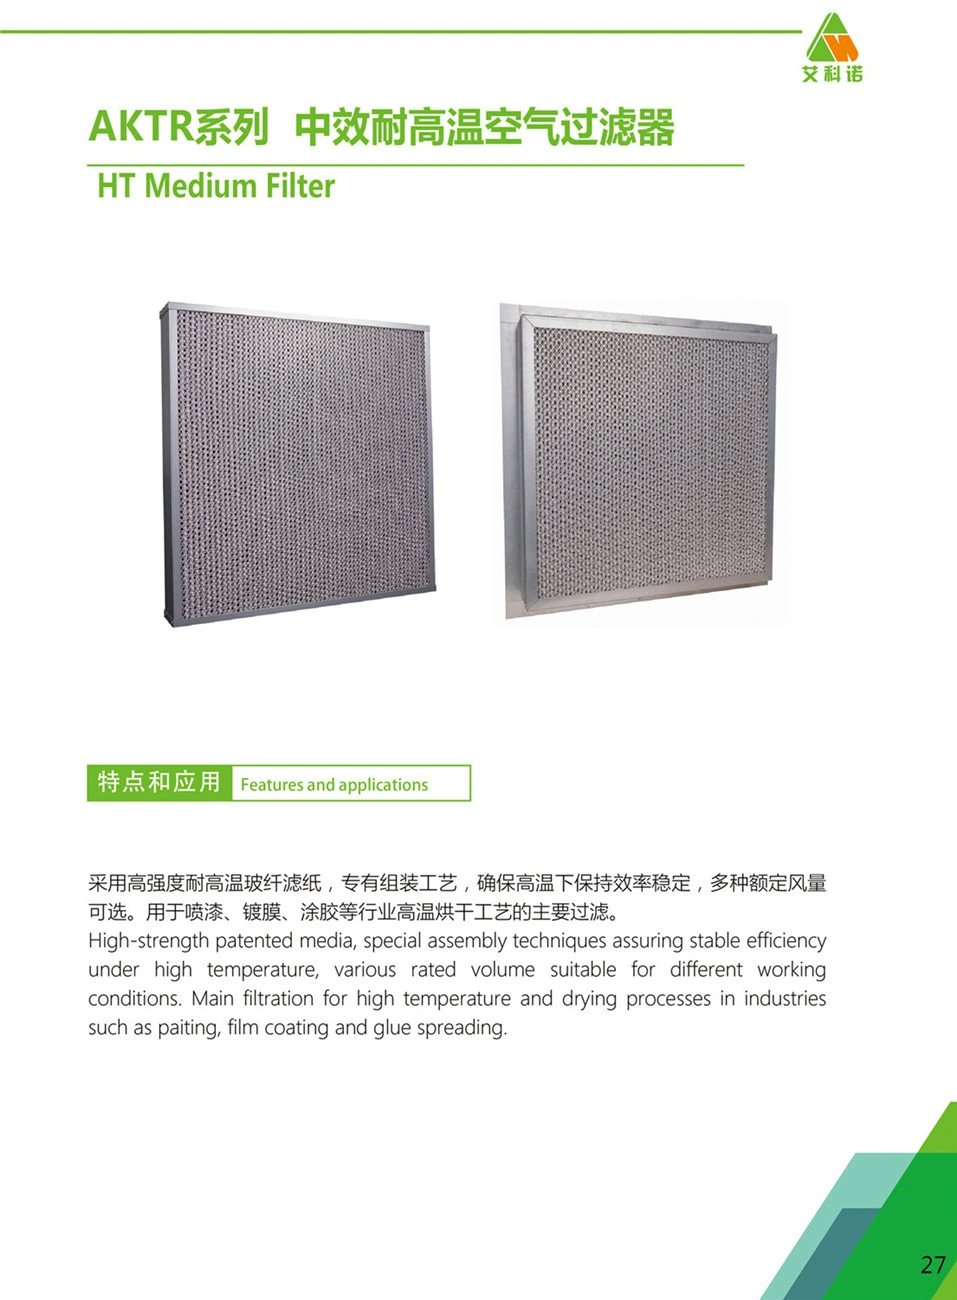 High Temperature Filter to Clean The Room